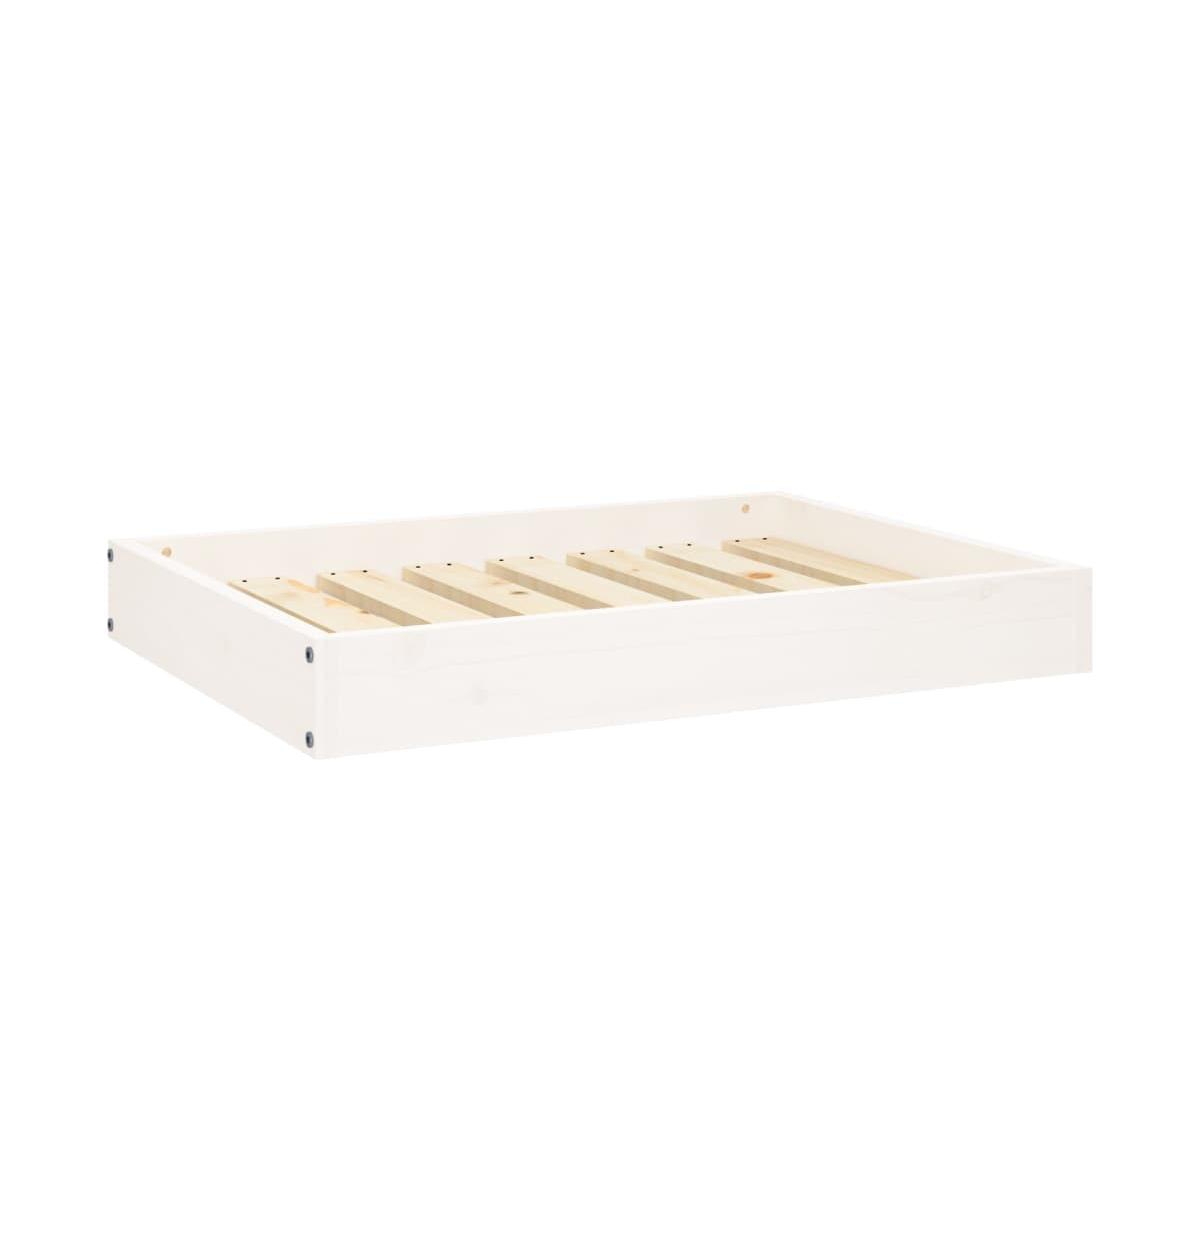 Dog Bed White 28.1"x21.3"x3.5" Solid Wood Pine - White